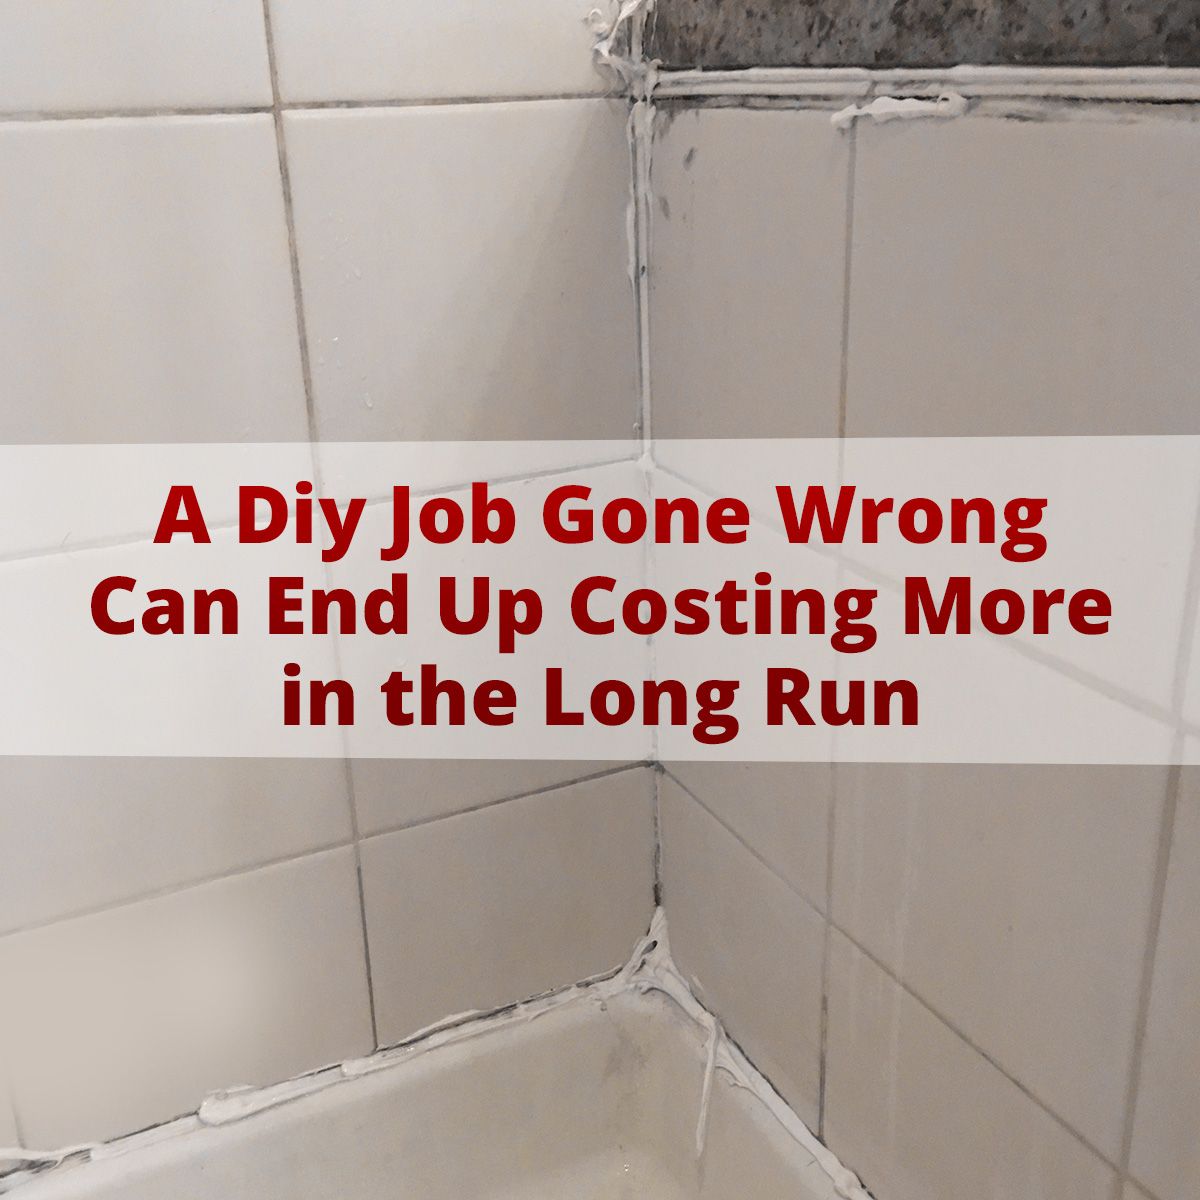 A Diy Job Gone Wrong Can End Up Costing More in the Long Run